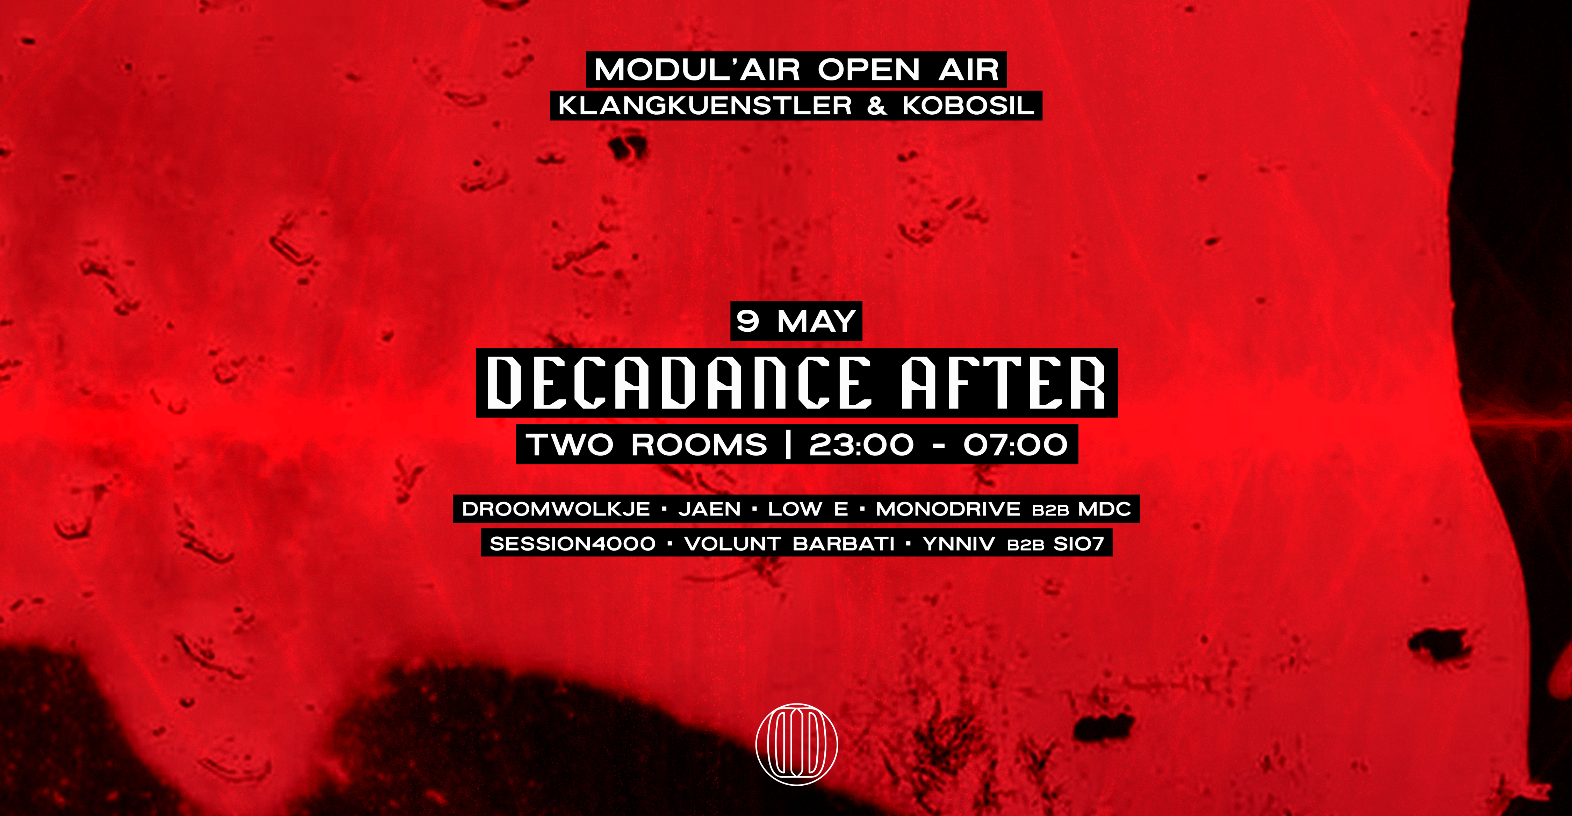 Decadance pres. MODUL'AIR Open Air — After: 9 May - Página frontal